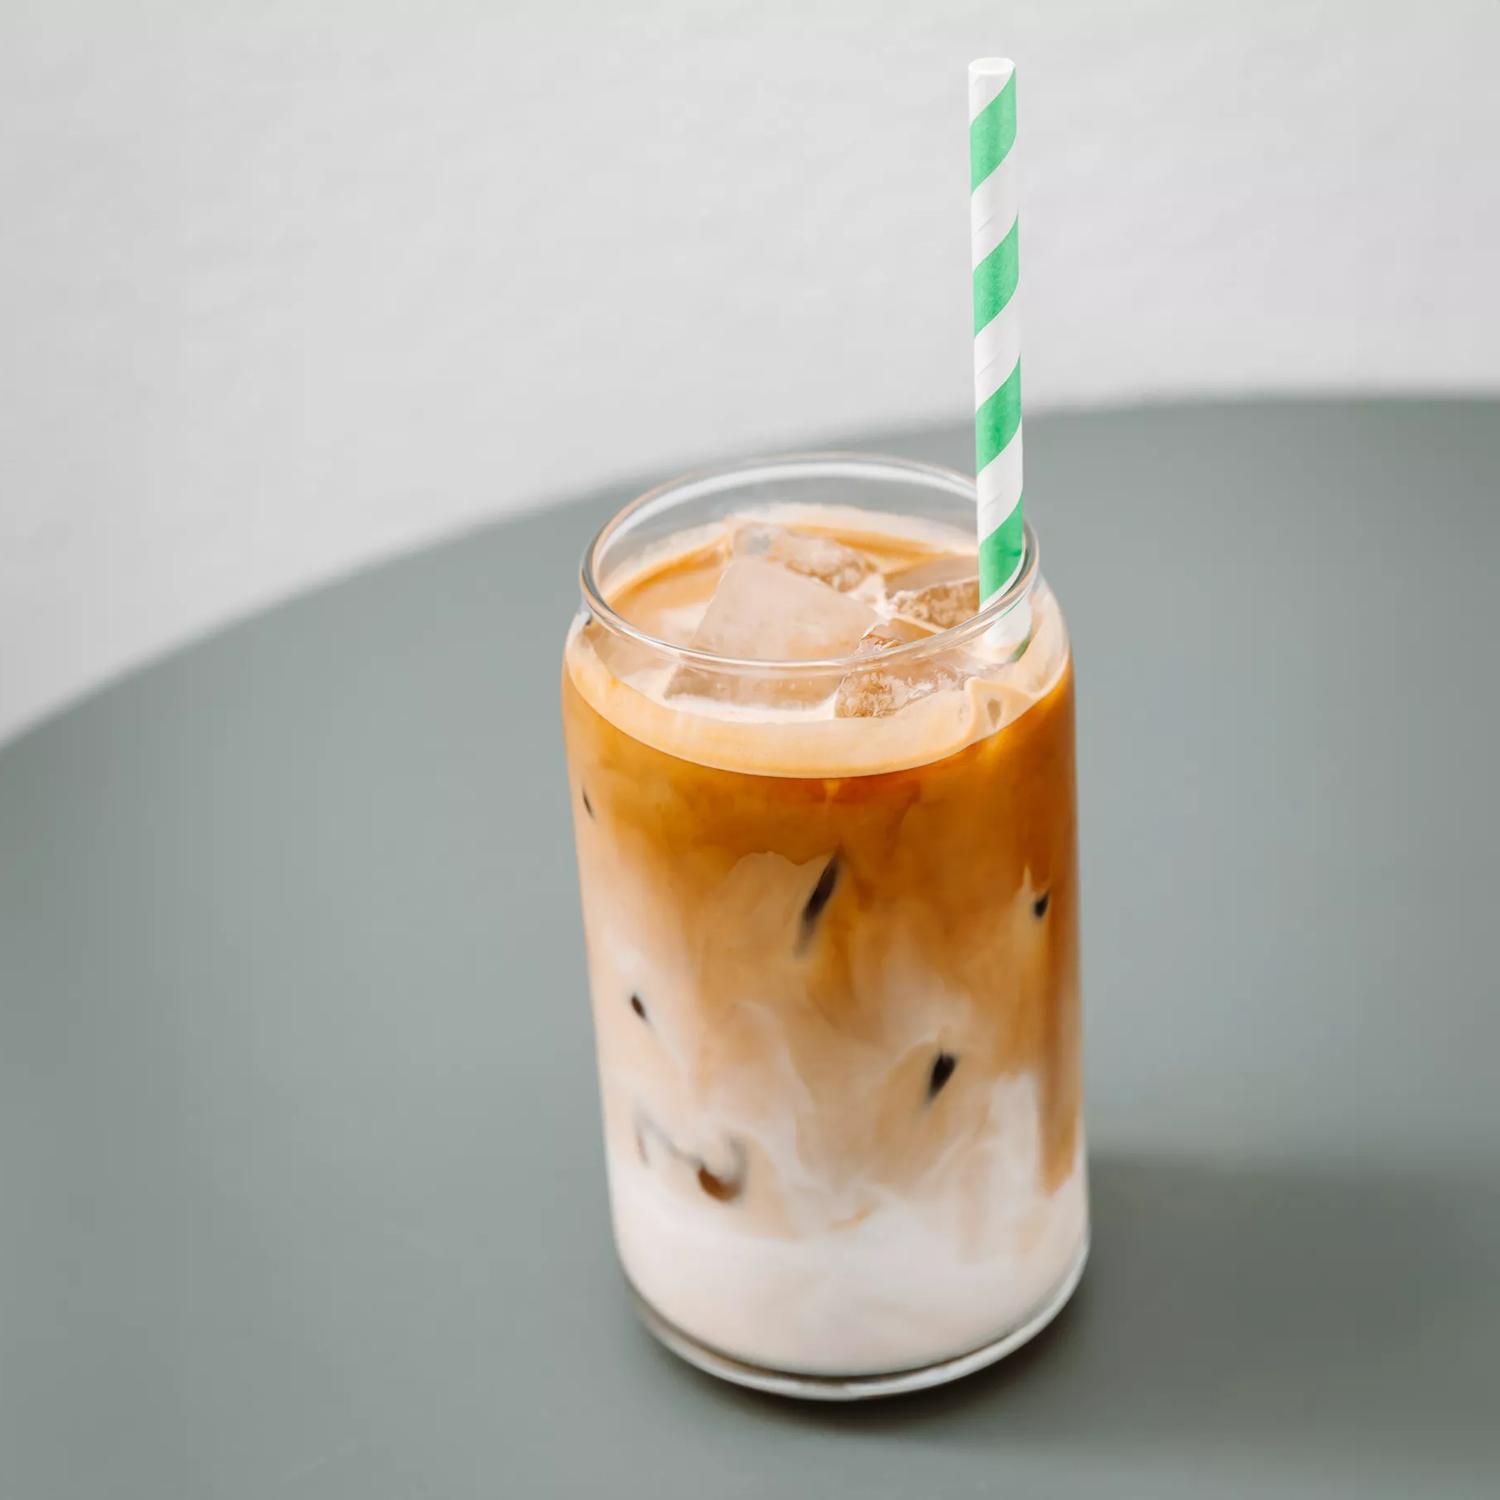 An iced coffee in a glass cup made by West Two espresso, with a green straw.